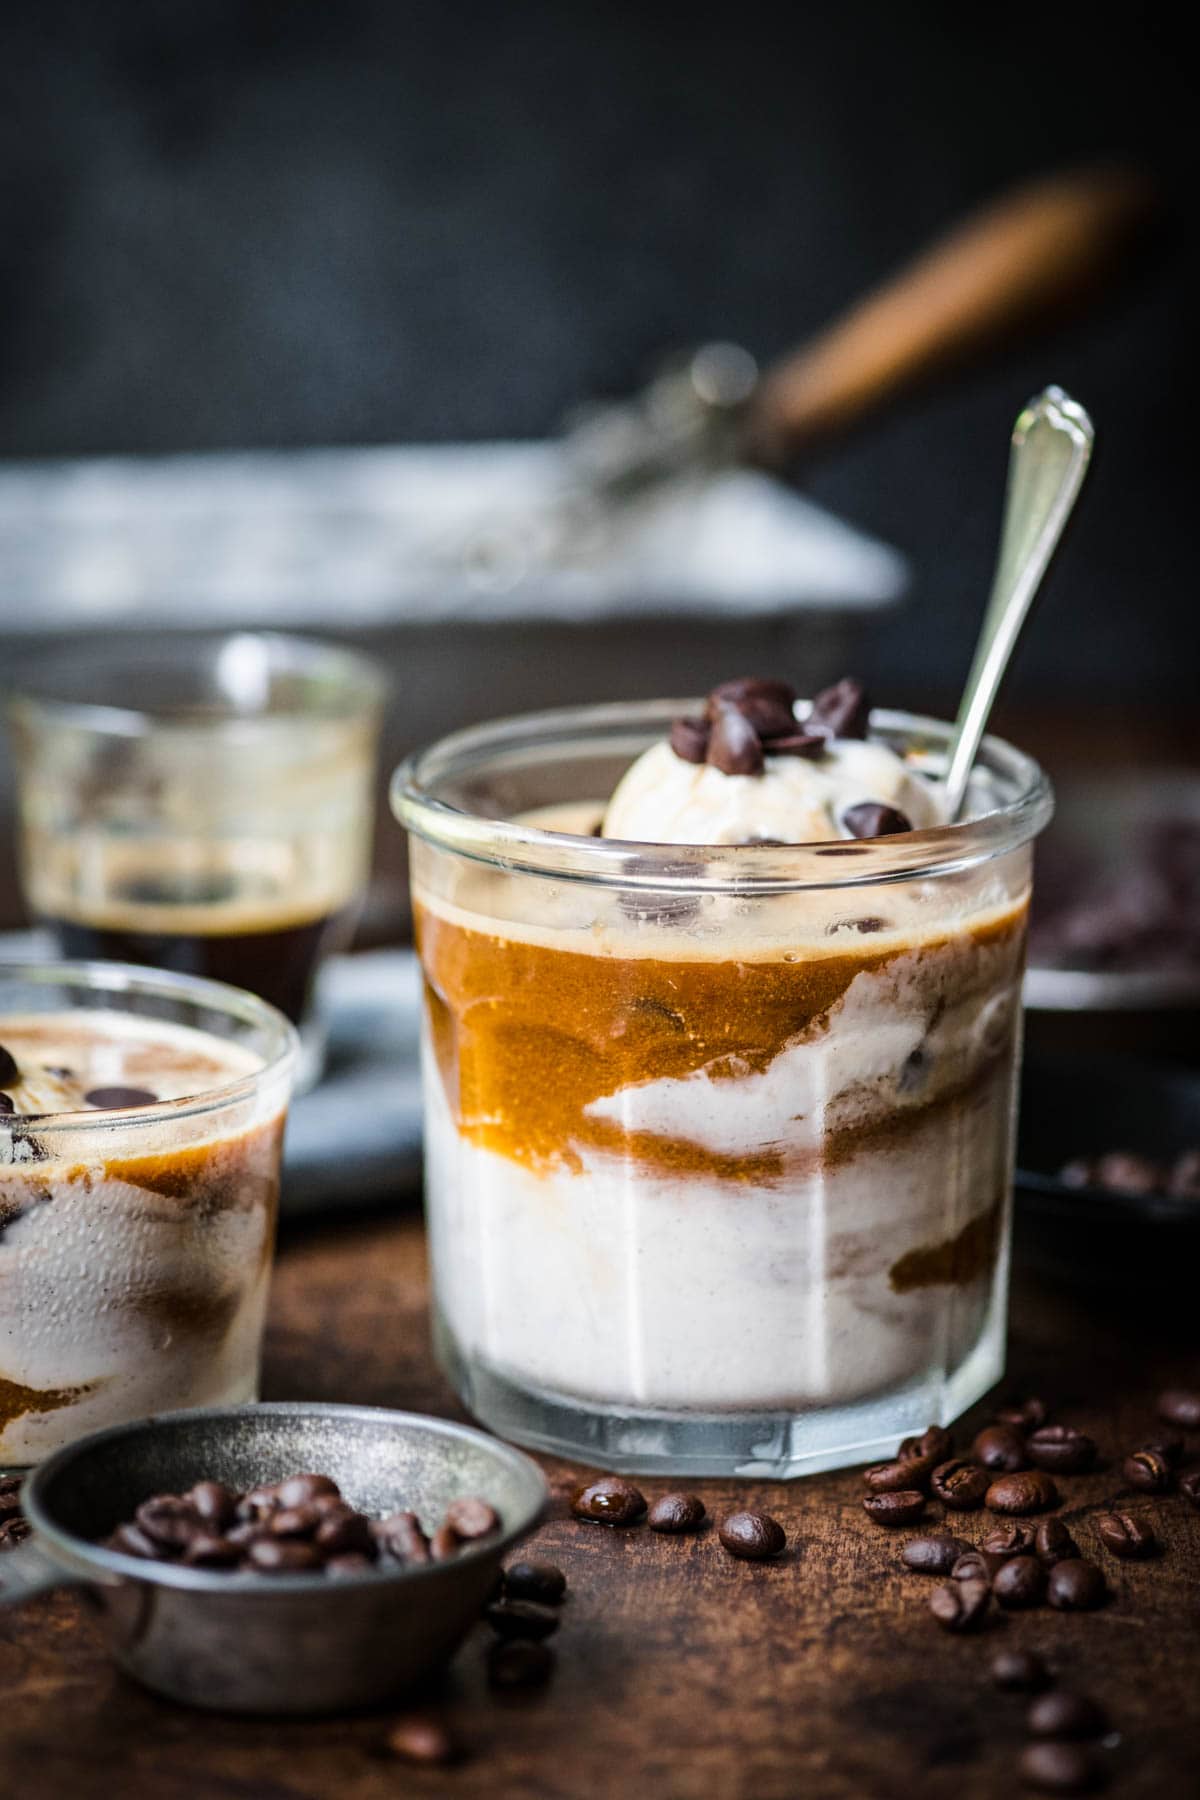 Front view of affogato in a glass cup with a spoon inside it.